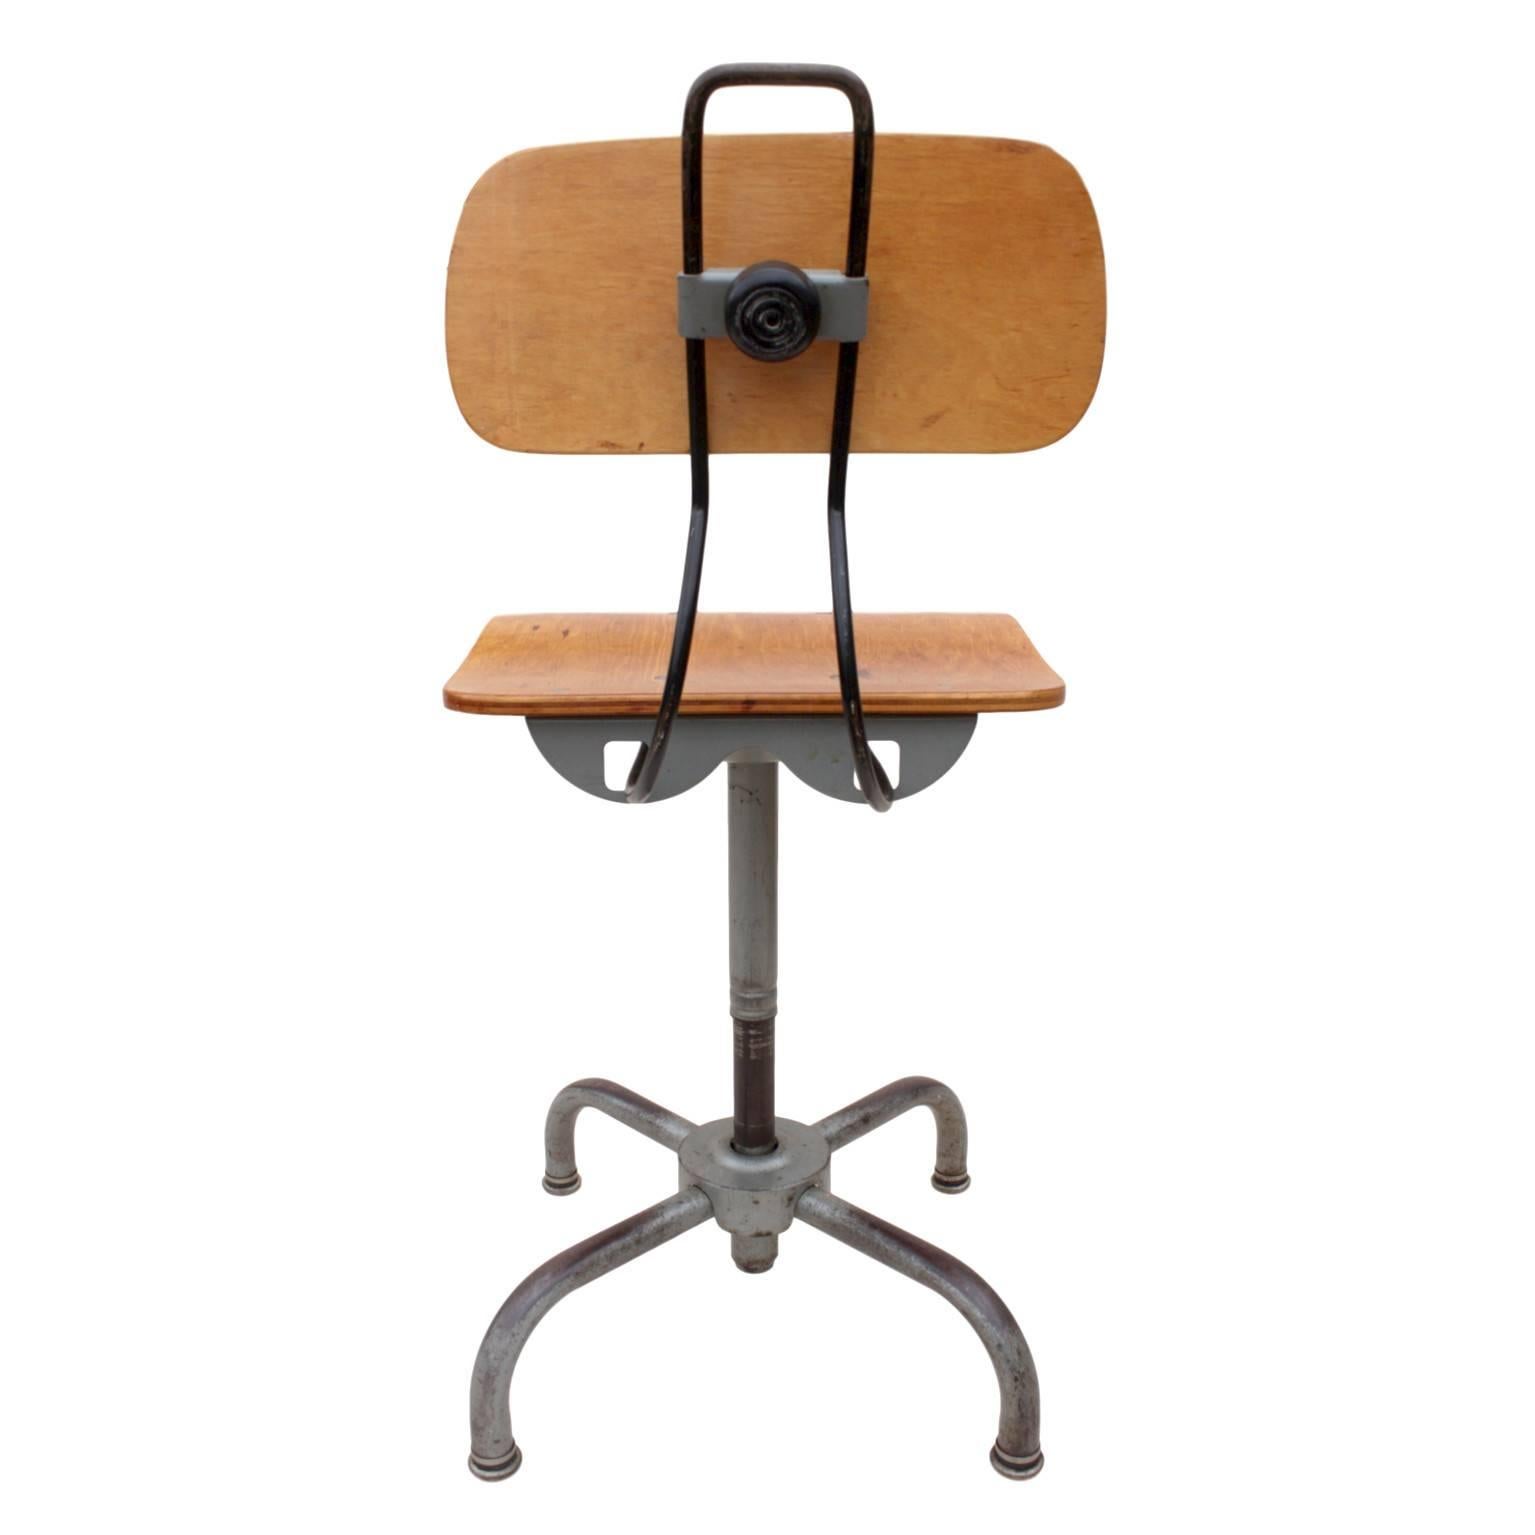 This great little stool spent the past 50 years of its life in a university laboratory and as a result, has a beautifully worn patina to the gray frame and base. Bentwood seat and back have been given a new coat of stain and finish and are in very